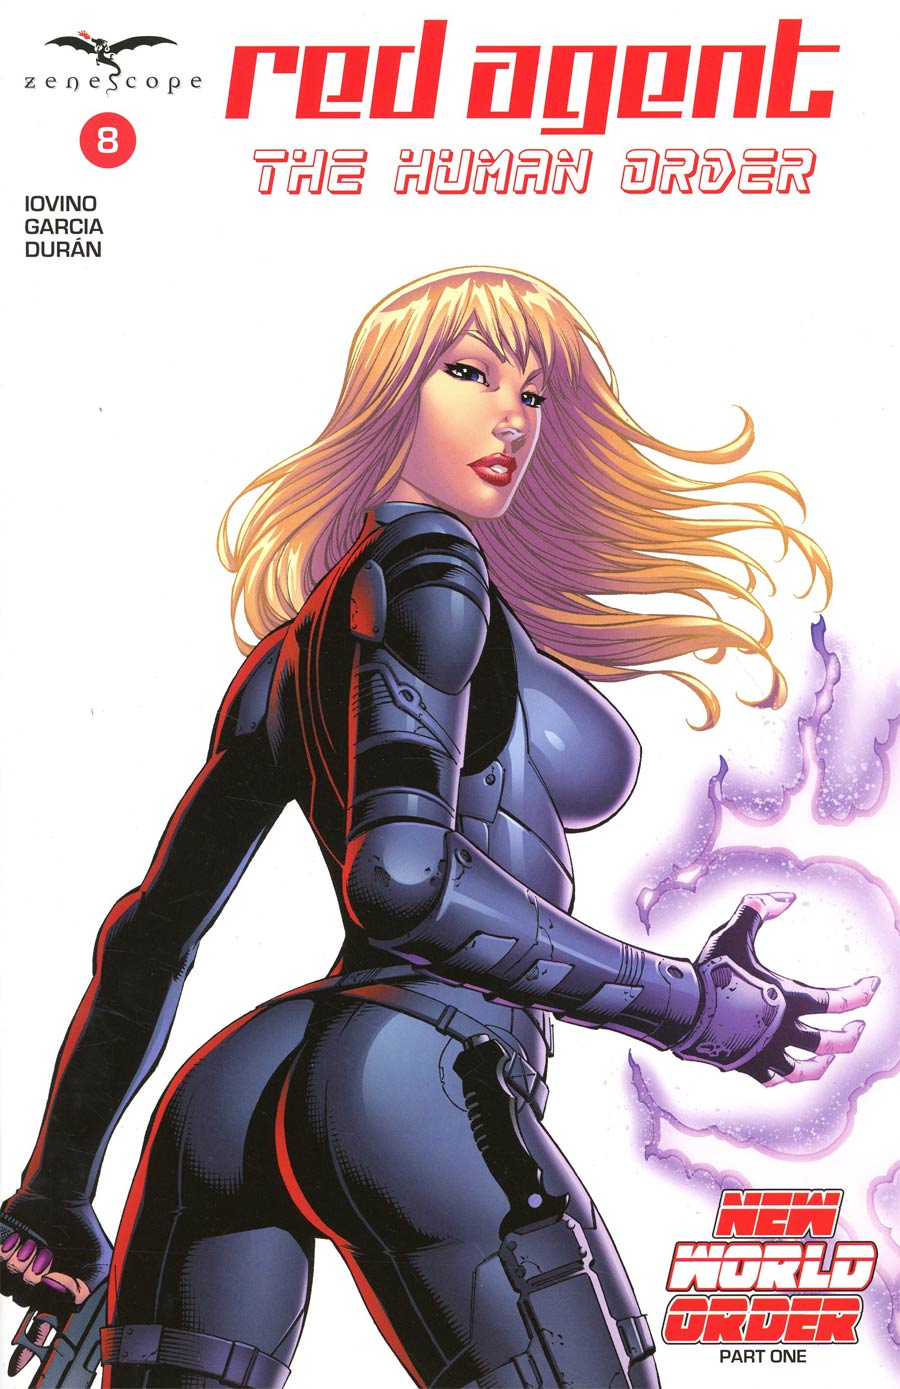 Grimm Fairy Tales Presents Red Agent Human Order #8 Cover D Renato Rei